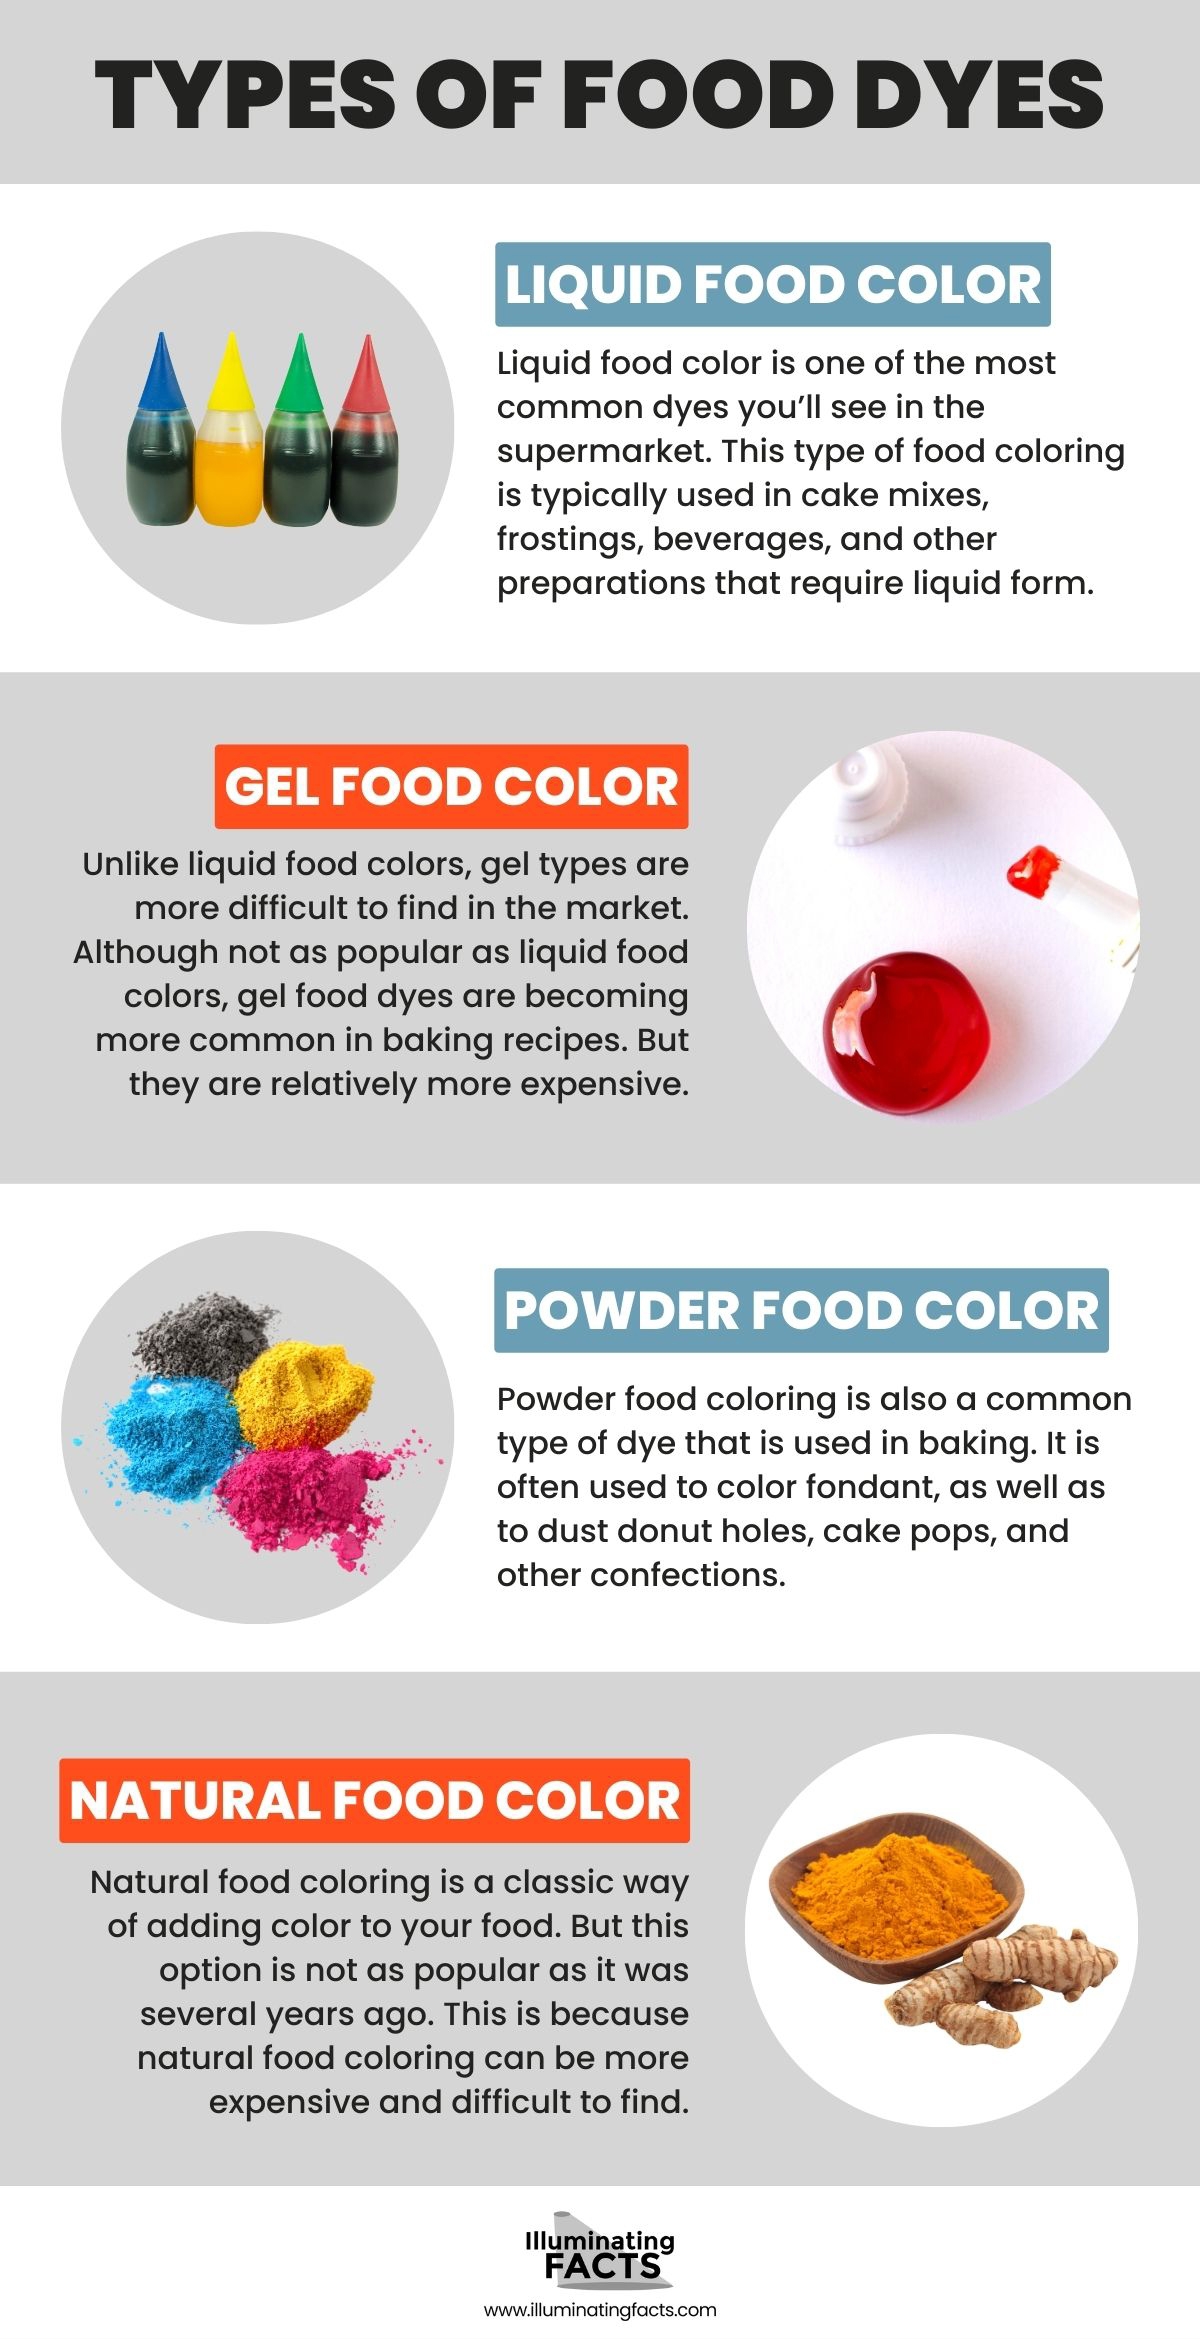 Types of Food Dyes